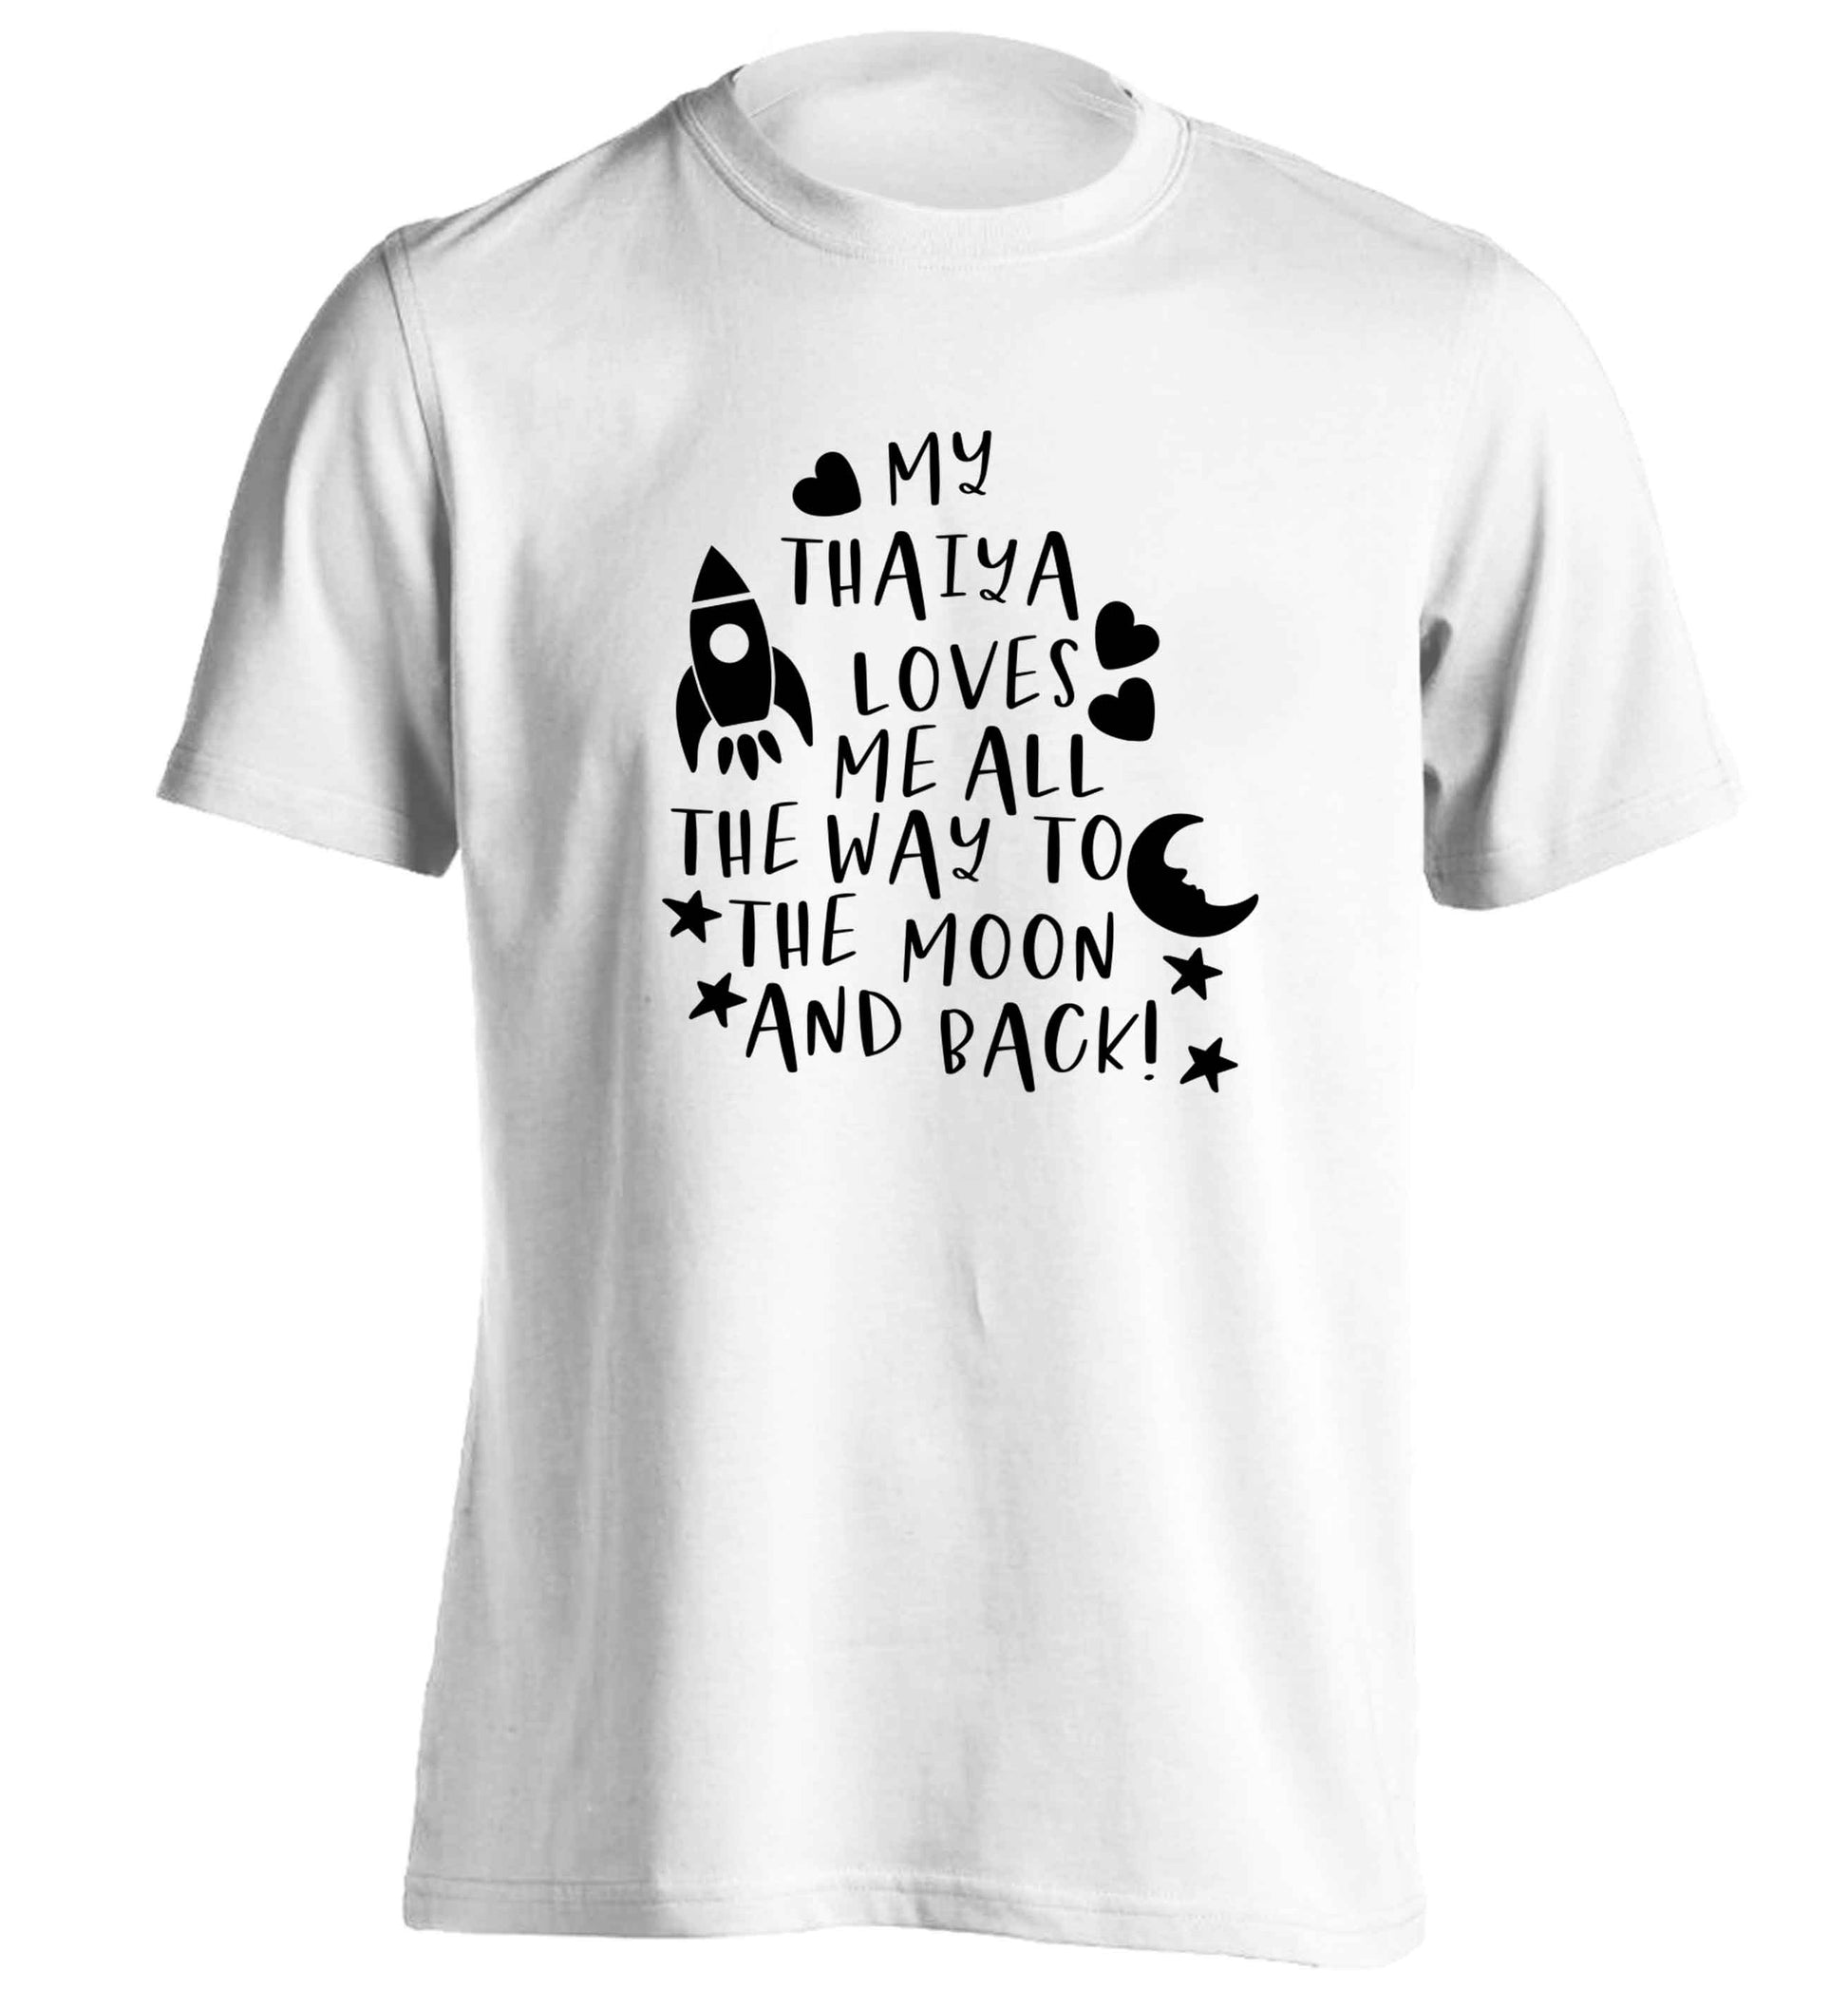 My thaiya loves me all the way to the moon and back adults unisex white Tshirt 2XL